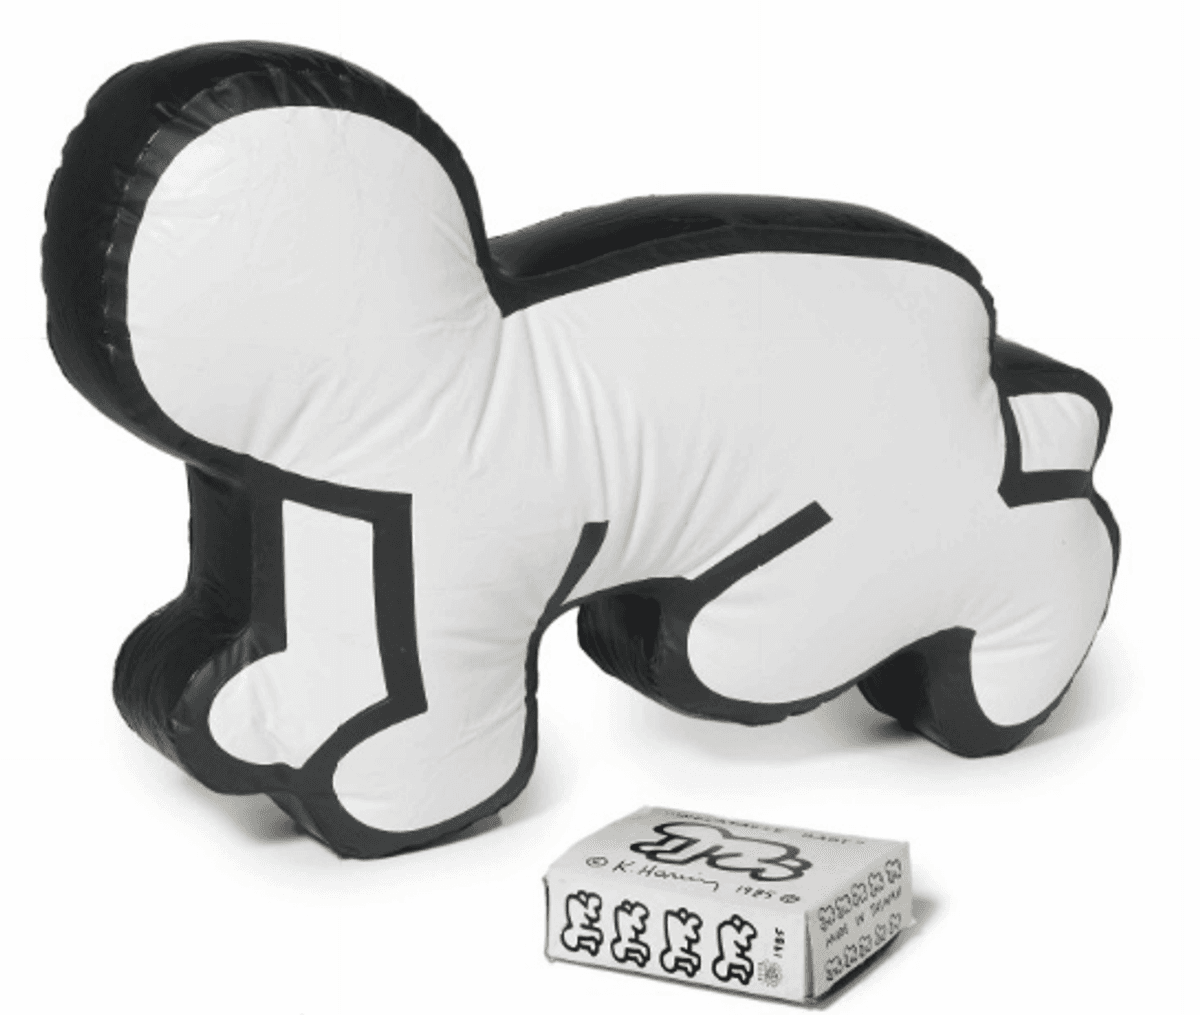 Keith Haring Inflatable Baby inflatable vinyl multiple